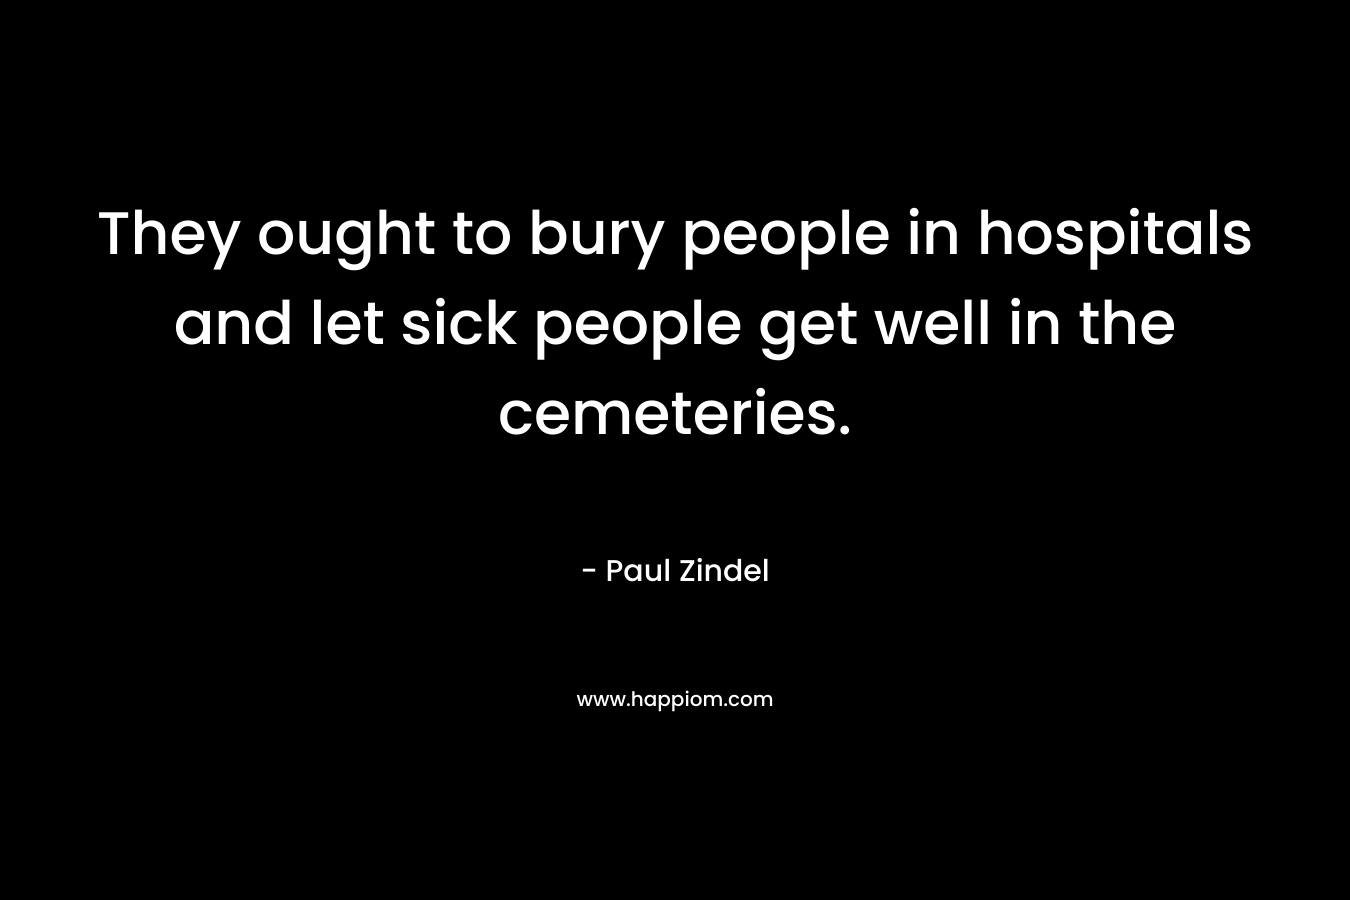 They ought to bury people in hospitals and let sick people get well in the cemeteries. – Paul Zindel